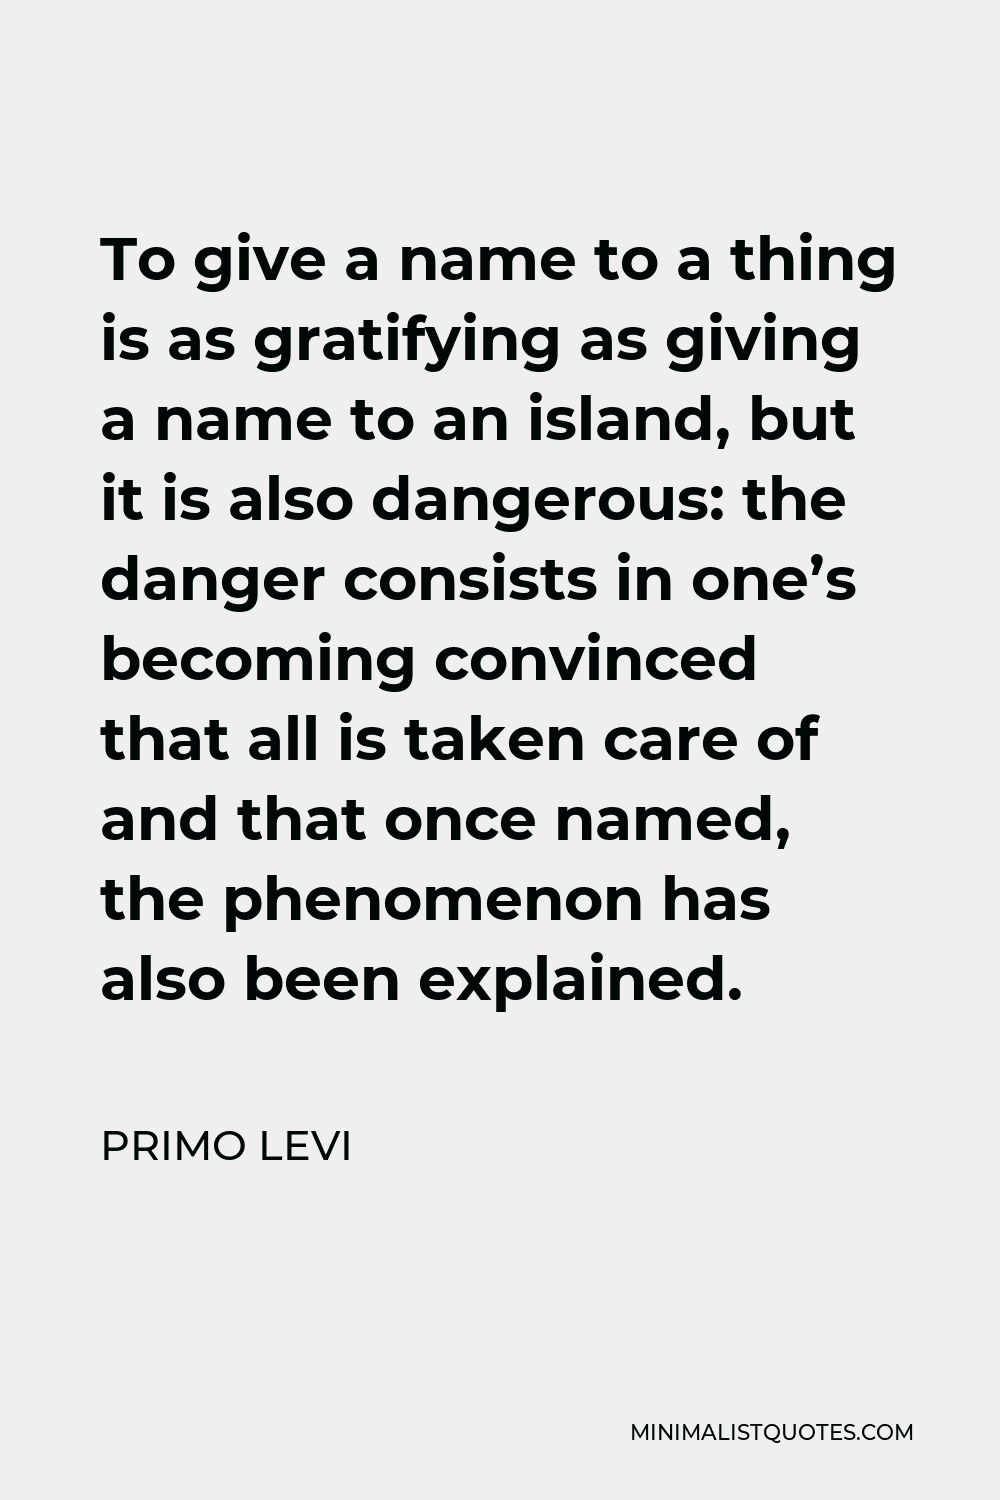 Primo Levi Quote - To give a name to a thing is as gratifying as giving a name to an island, but it is also dangerous: the danger consists in one’s becoming convinced that all is taken care of and that once named, the phenomenon has also been explained.